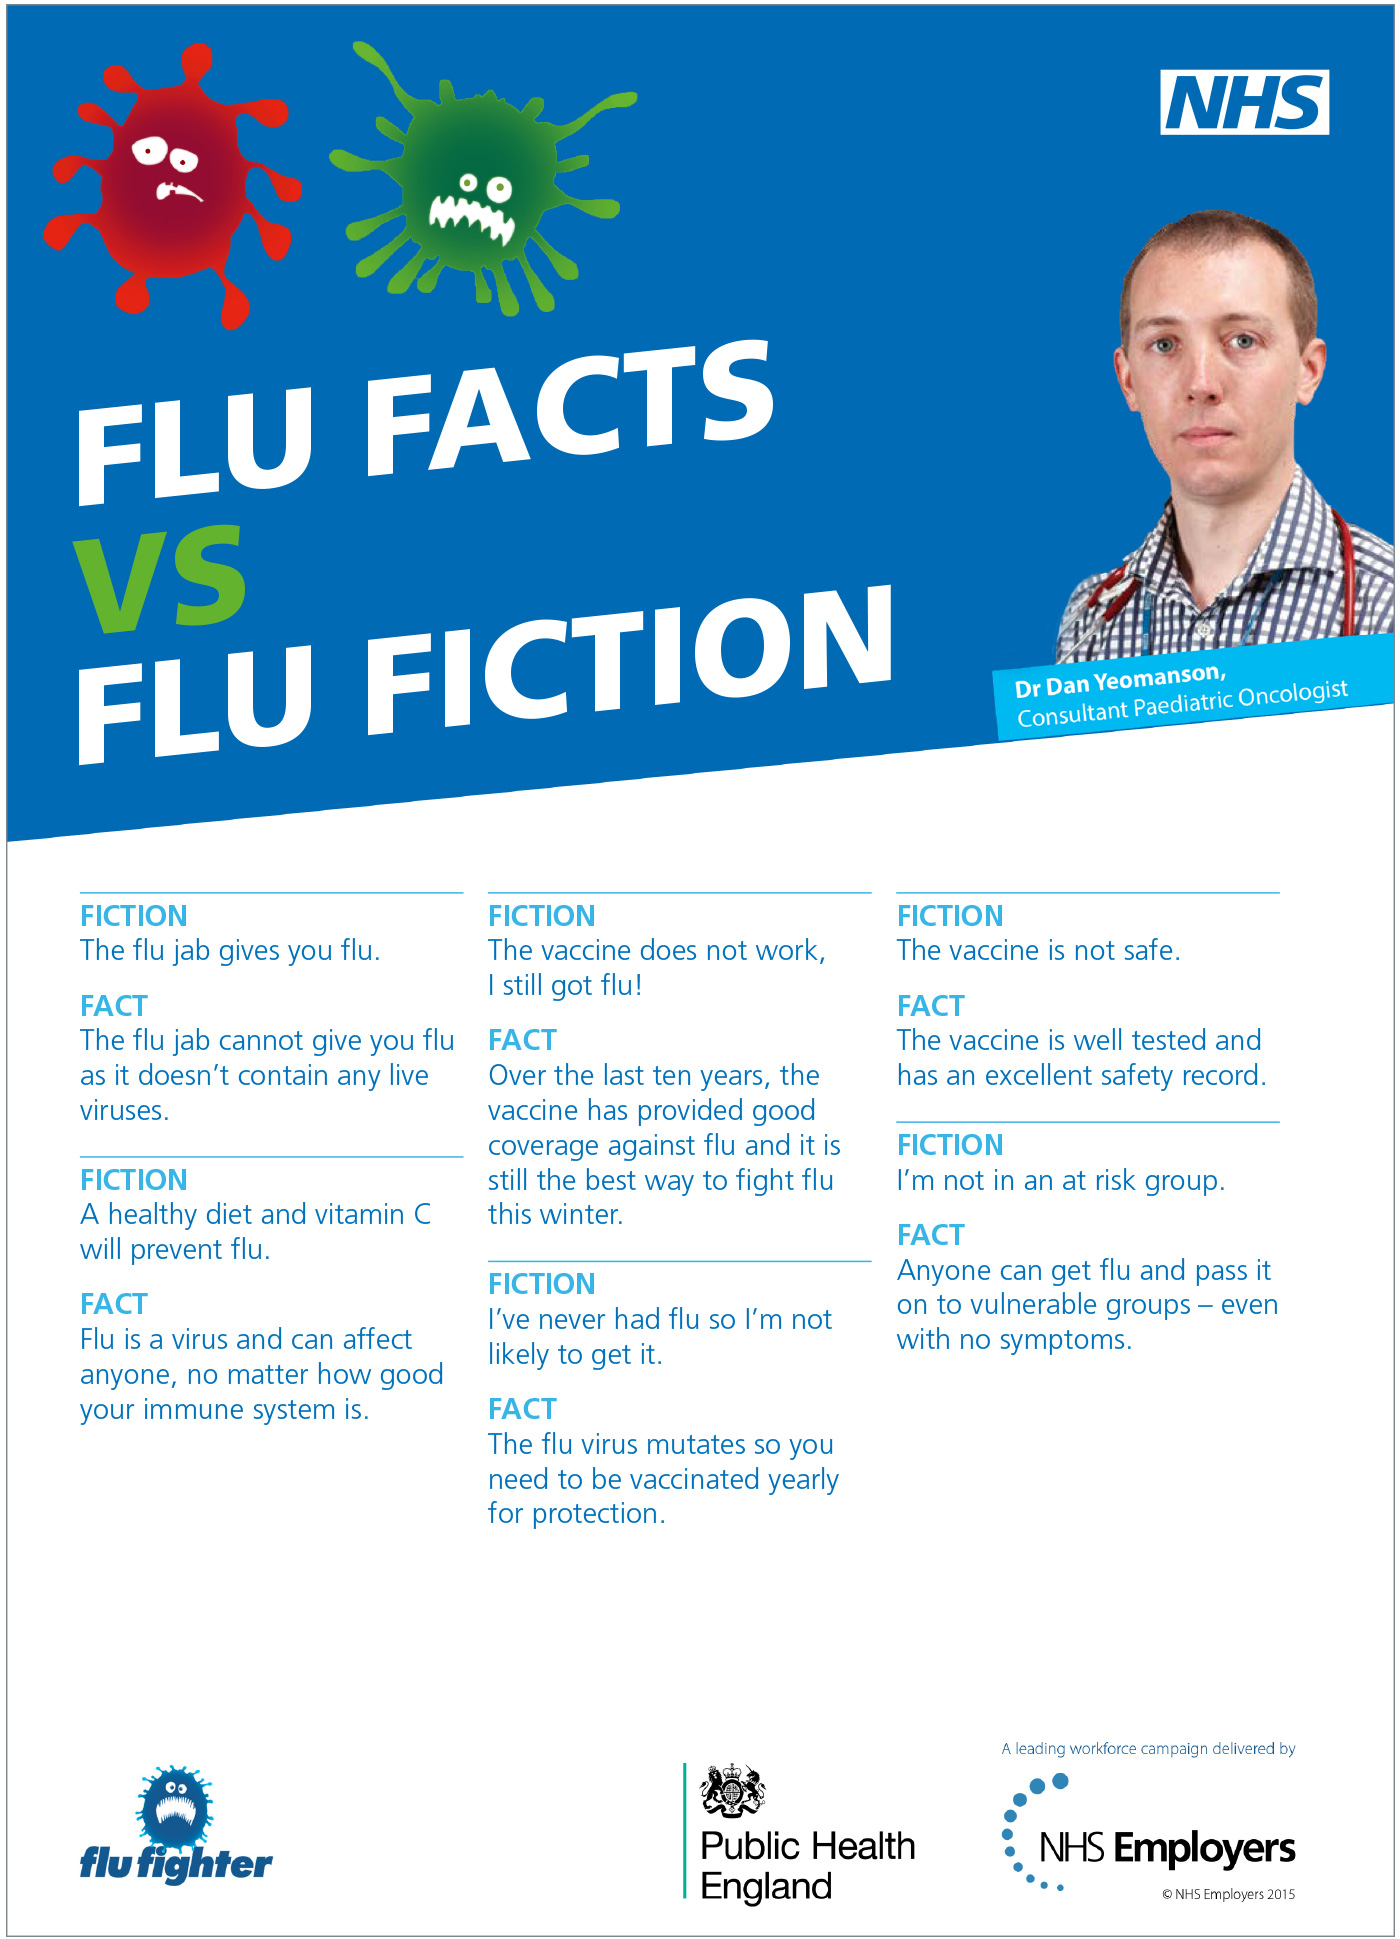 NHS-led-flu-campaign-with-supporting-partners